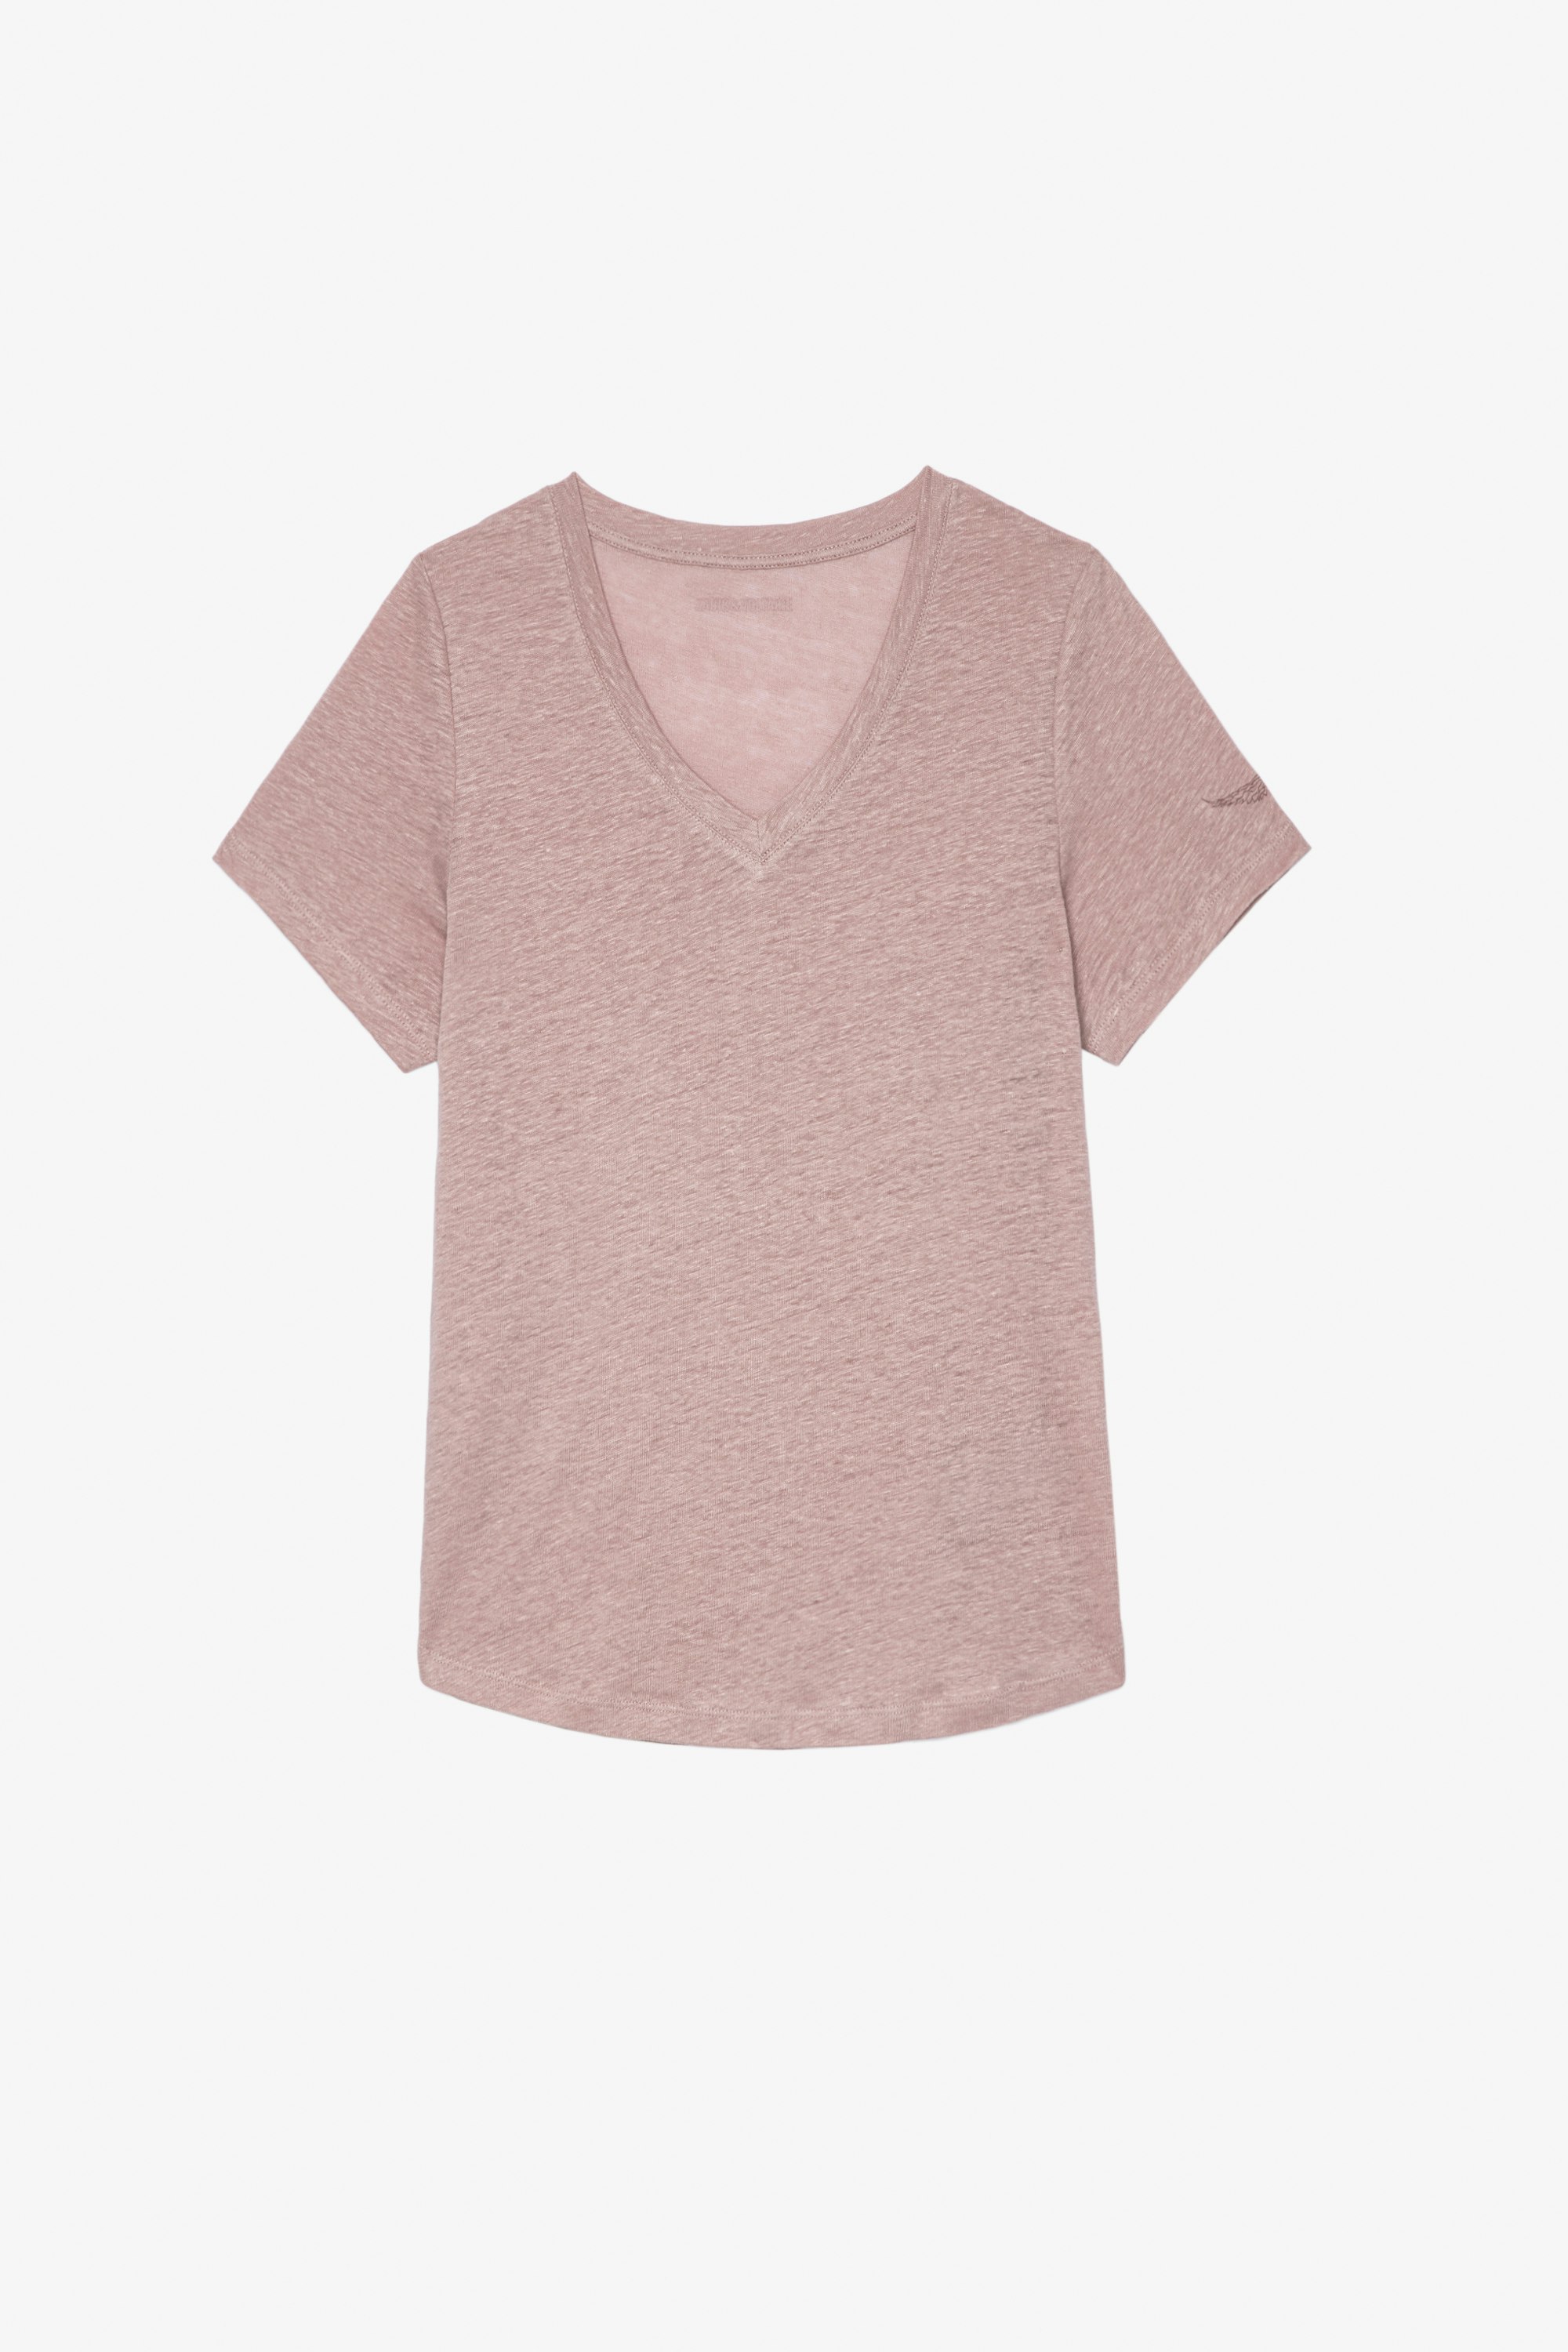 Atia Wings Linen T-Shirt Women's mauve linen t-shirt with wings on the left sleeve